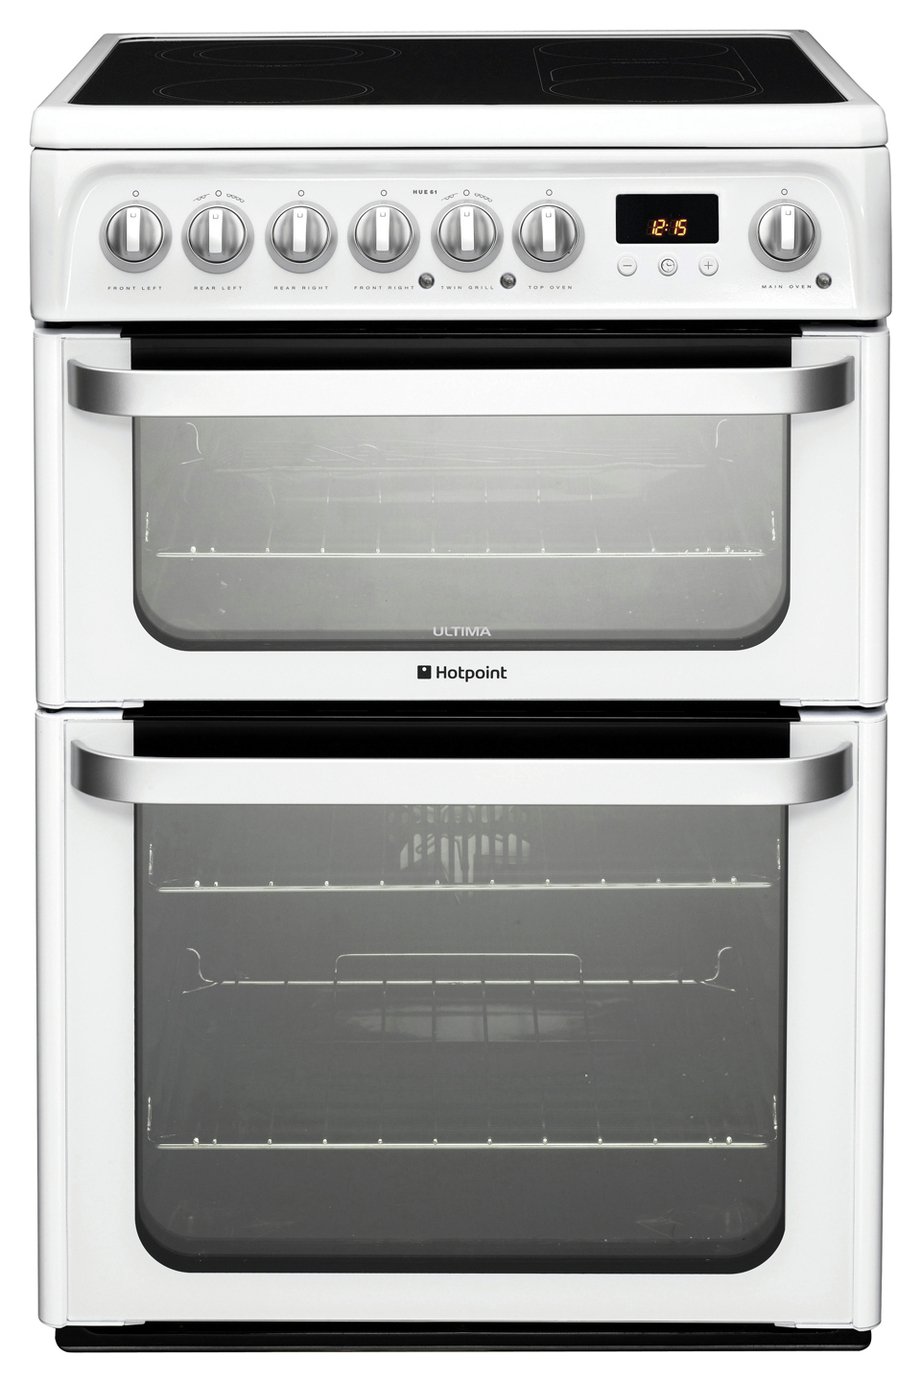 Hotpoint HUE61PS Double Electric Cooker review